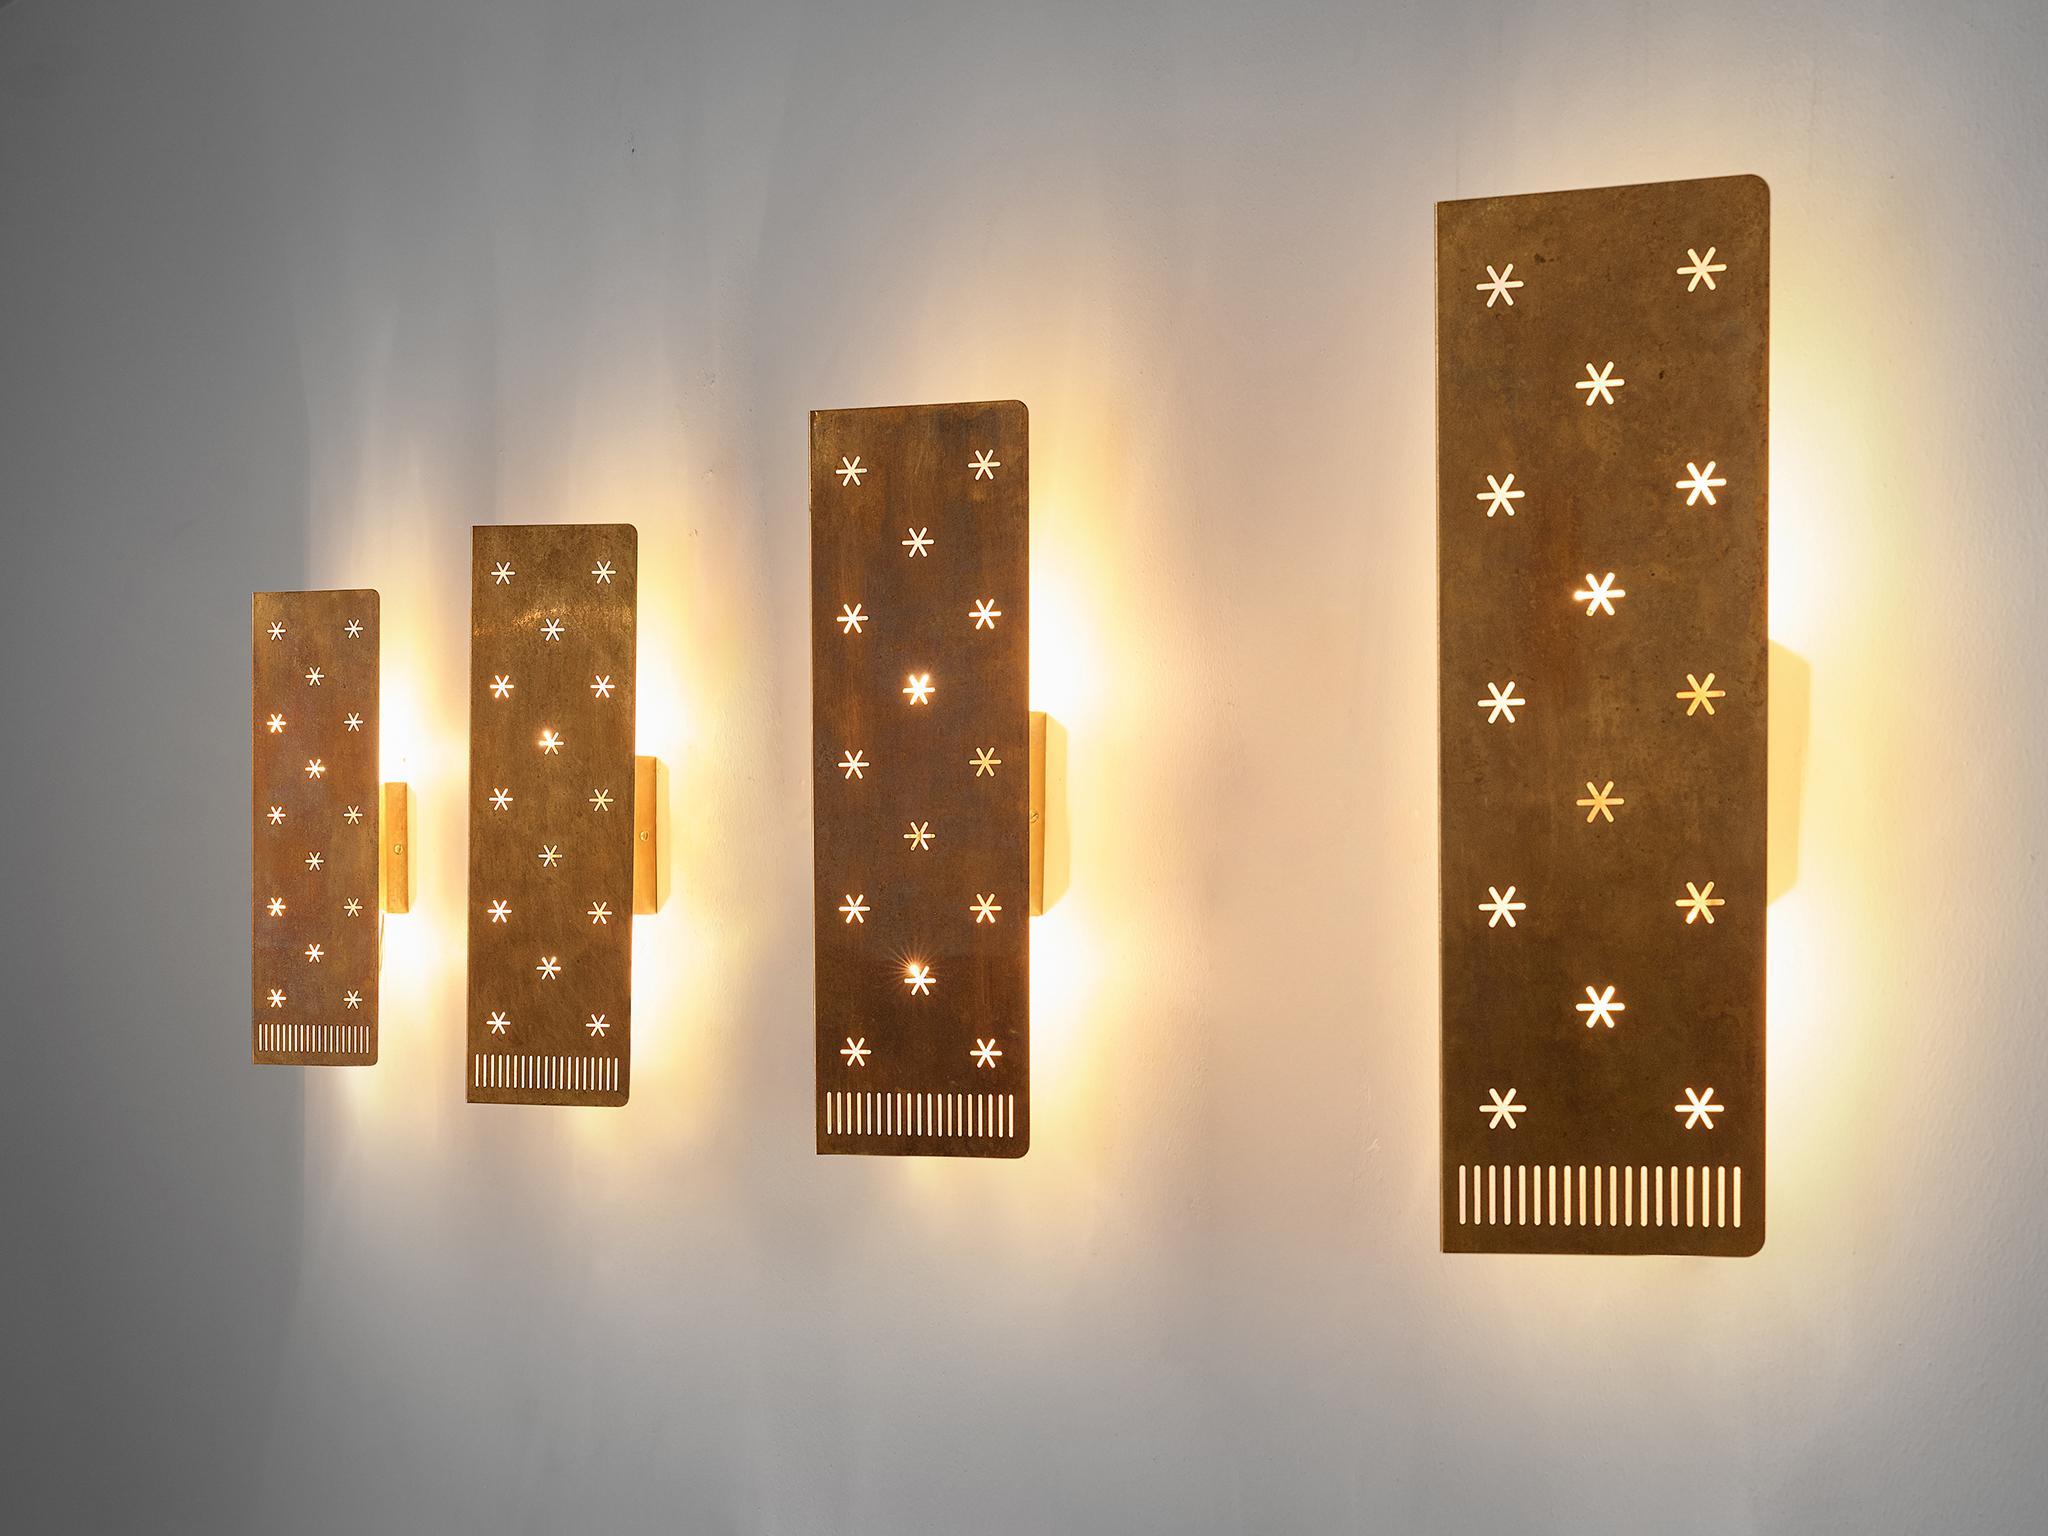 Paavo Tynell for Idman, '6200' wall lights, brass, Finland, circa 1953.

This model features a very refined design that shows Tynell's style perfectly. Use of perforated metal and polished brass were common materials and techniques he applied in